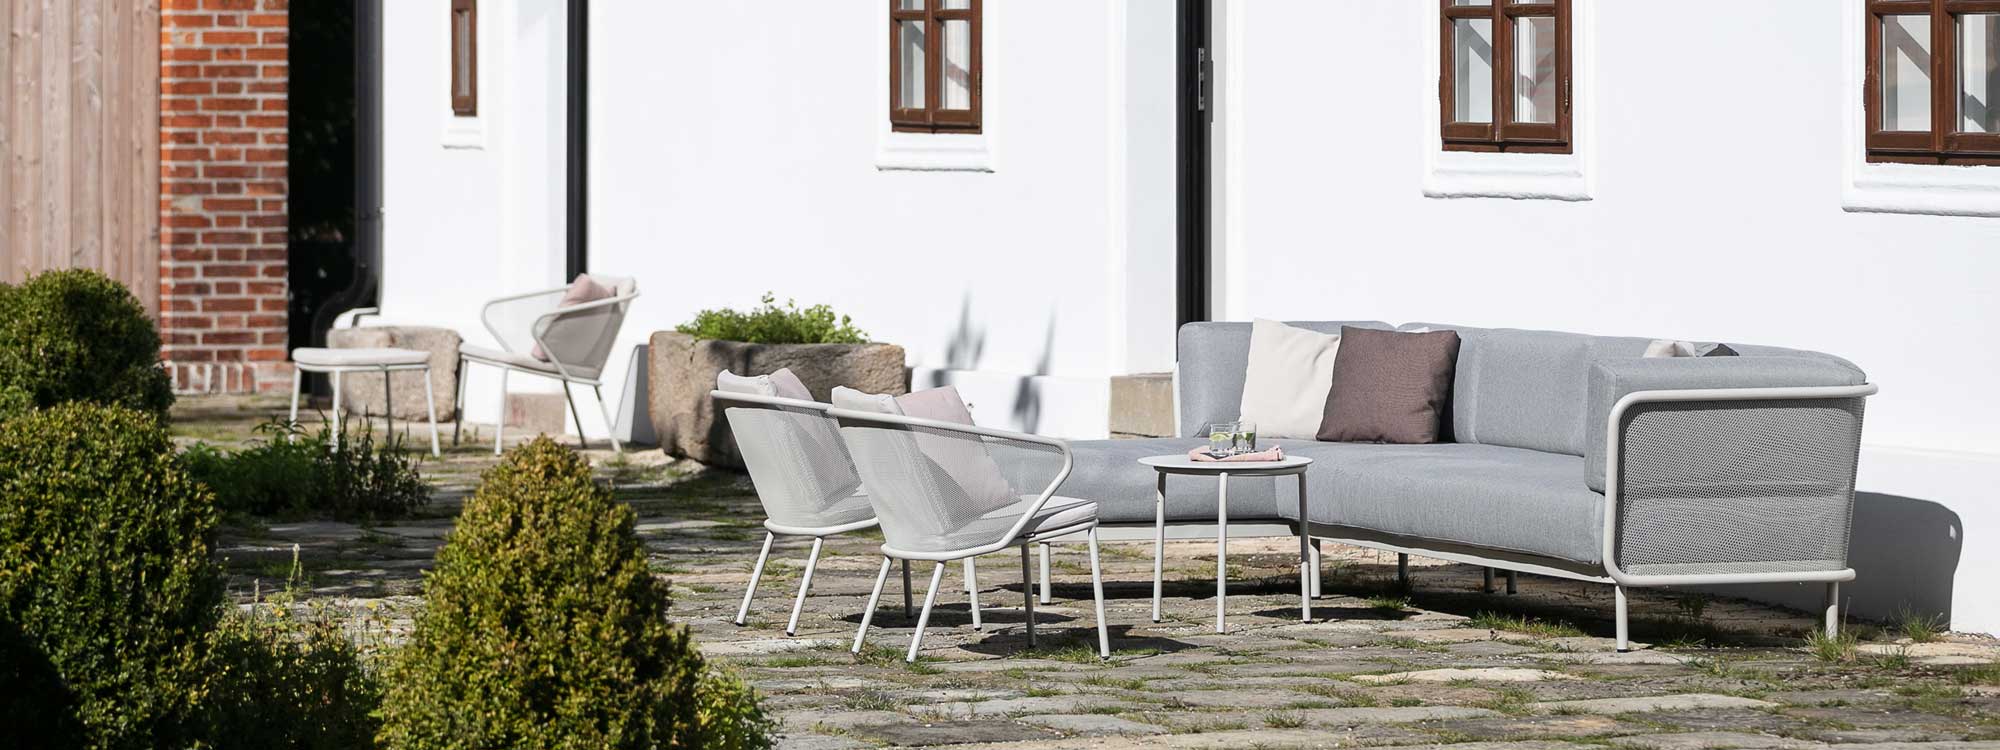 Baza stainless steel garden sofa with Condor lounge chairs and Starling low tables on sunny terrace